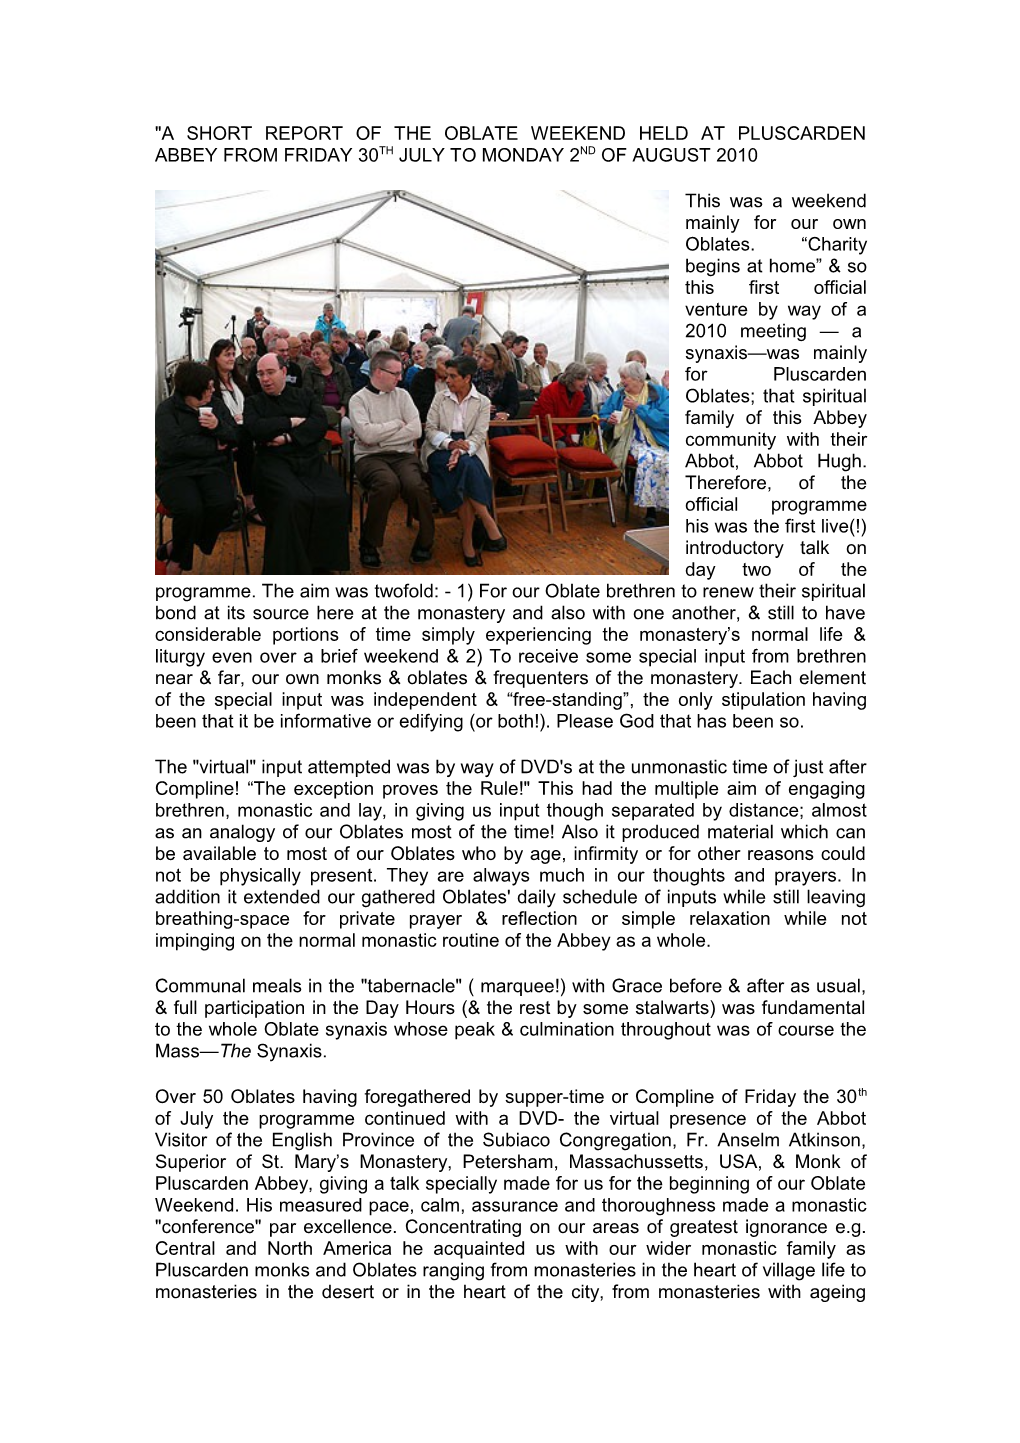 A Short Report of the Oblate Weekend Held at Pluscarden Abbey from Friday 30Th July To